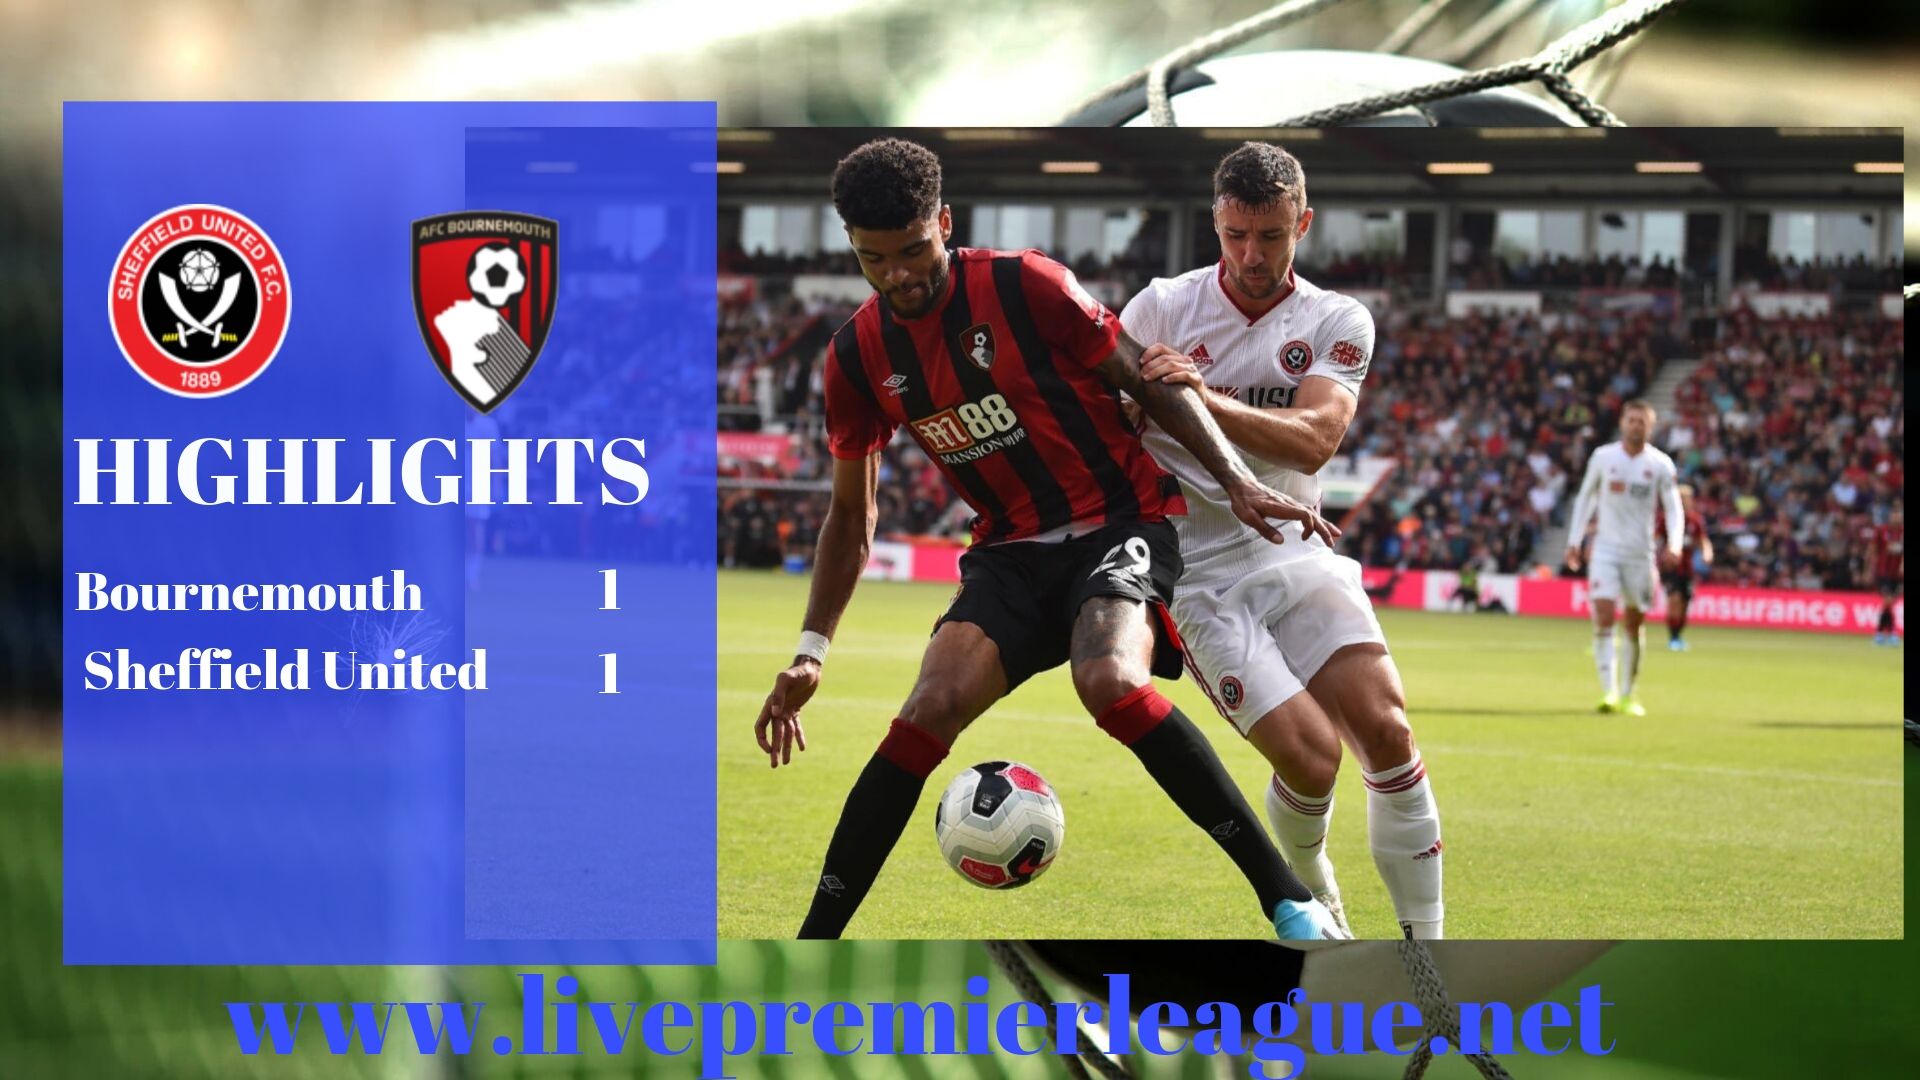 AFC Bournemouth Vs Sheffield United 2019 Premier League Highlights 